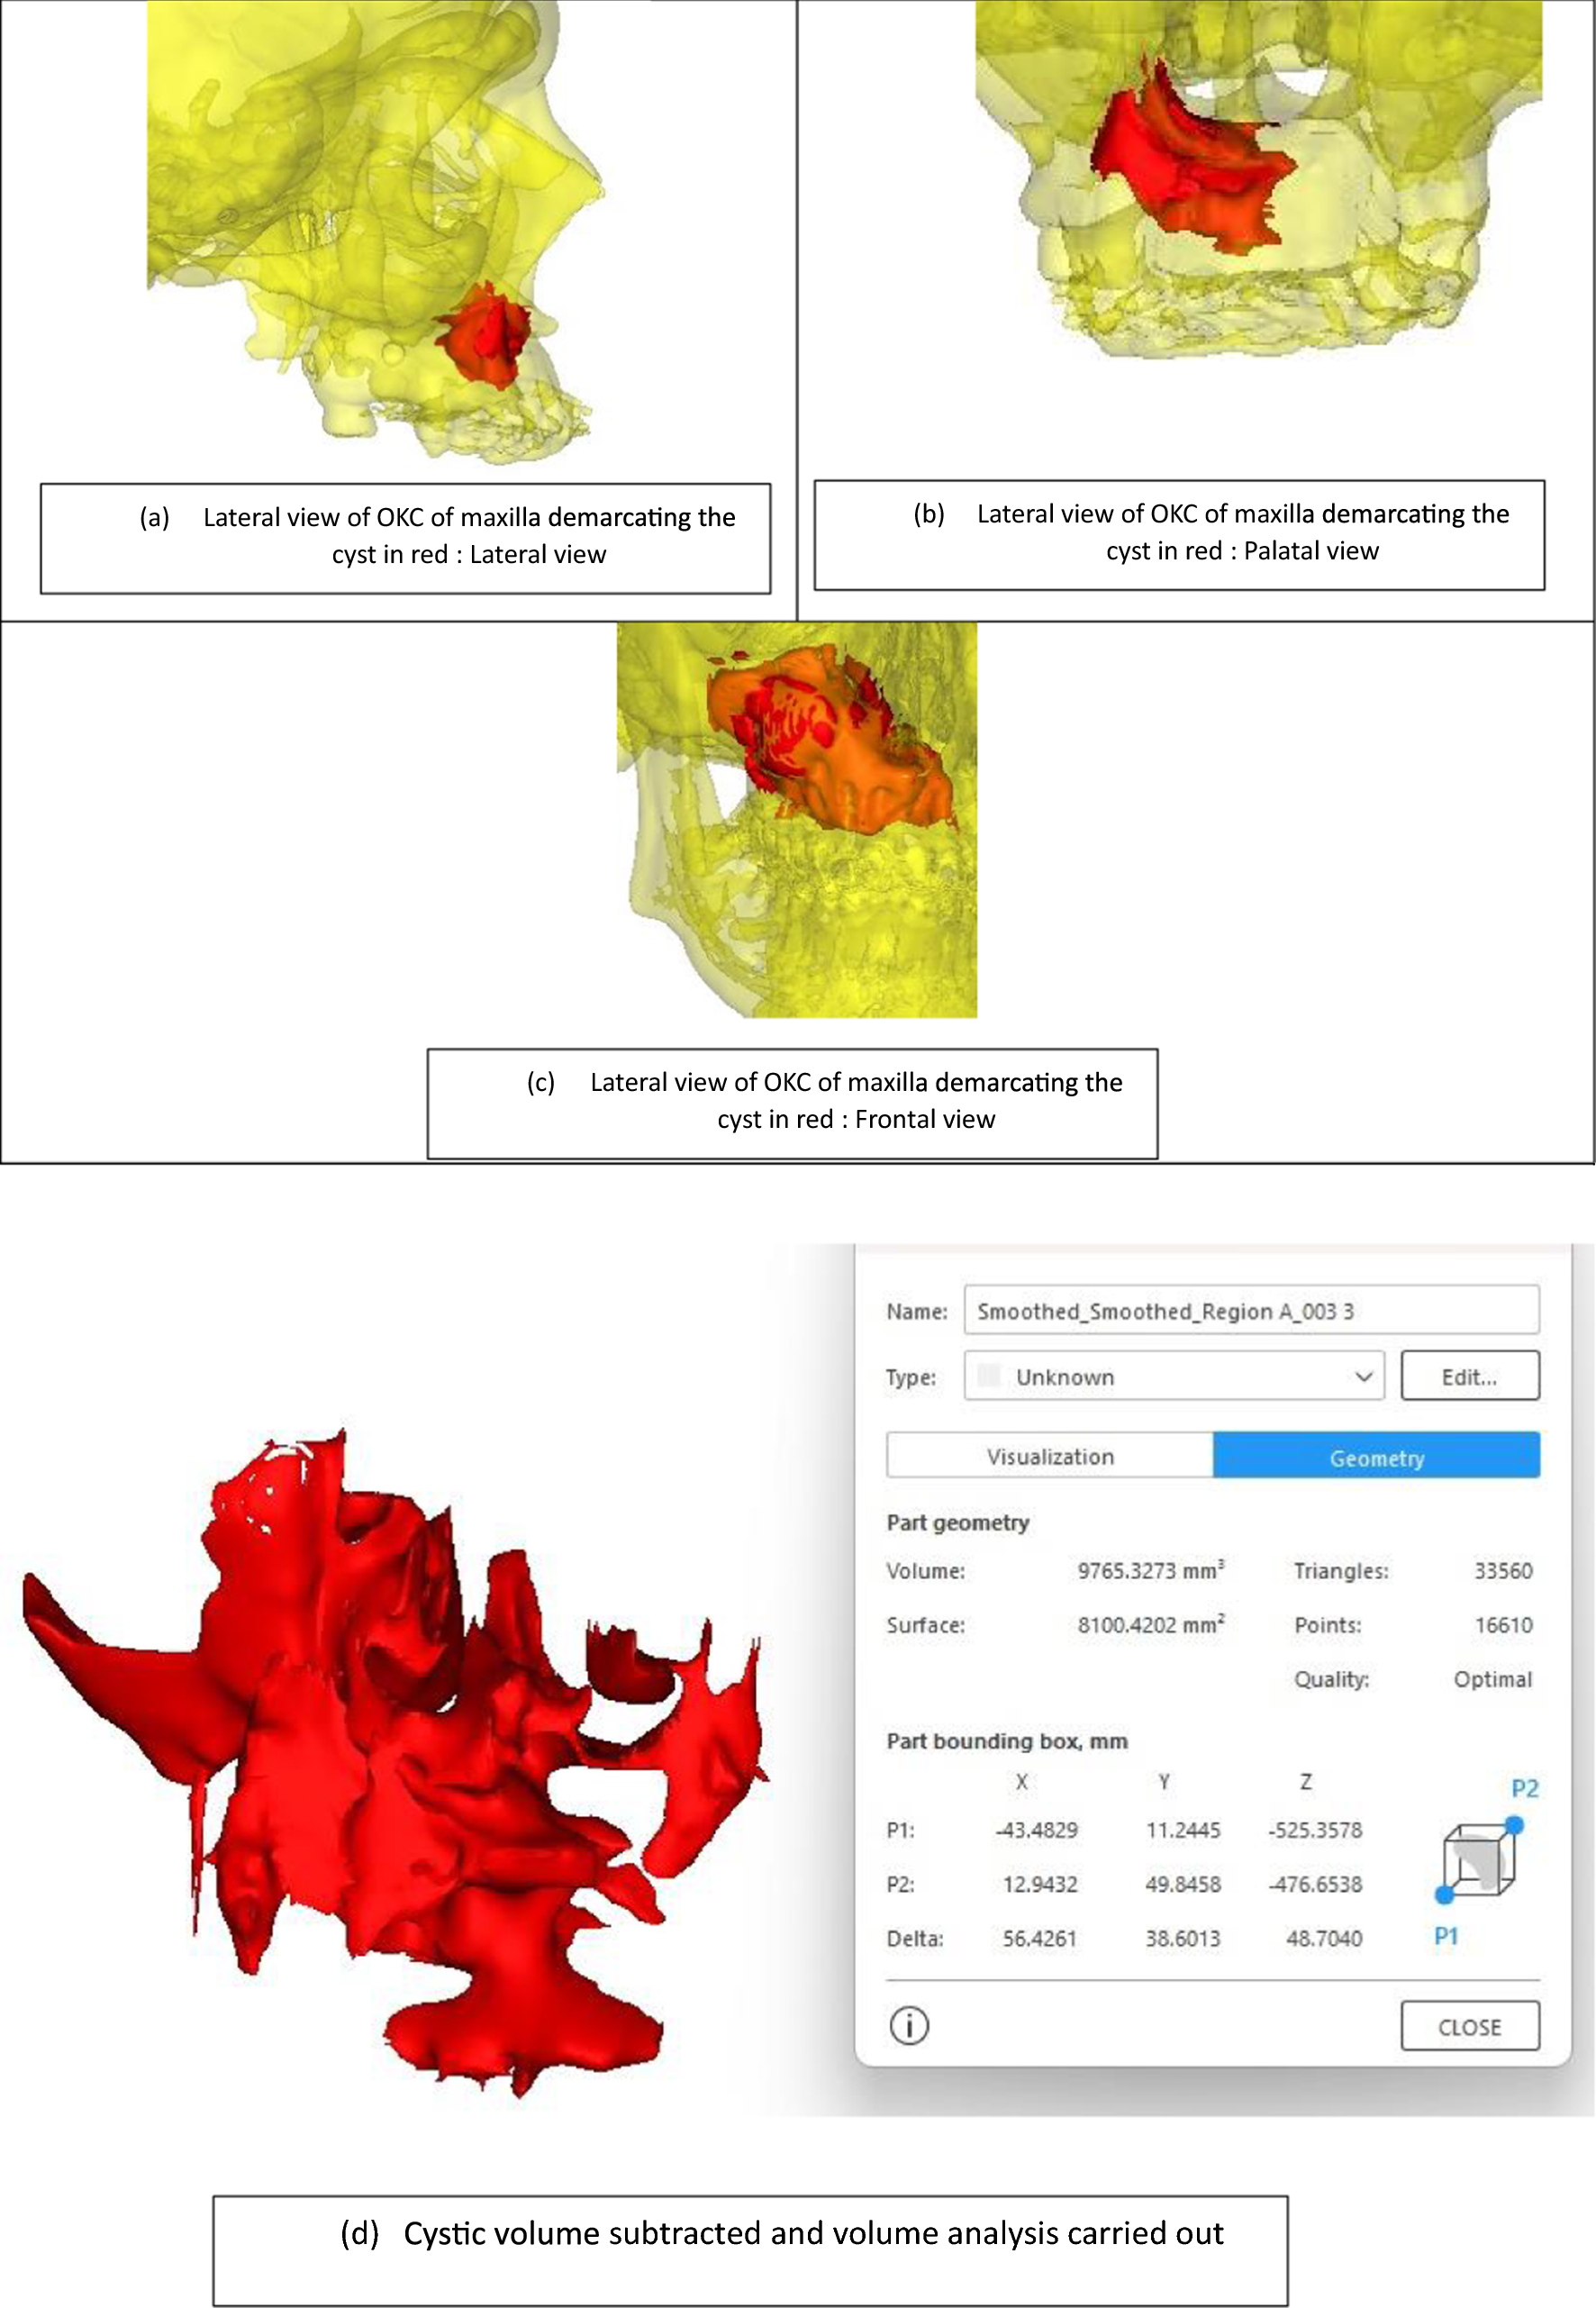 Volumetric Analysis and Healing Ratio: Refining Prognostic Assessment in Maxillofacial Cysts Using Cone-Beam Computed Tomography